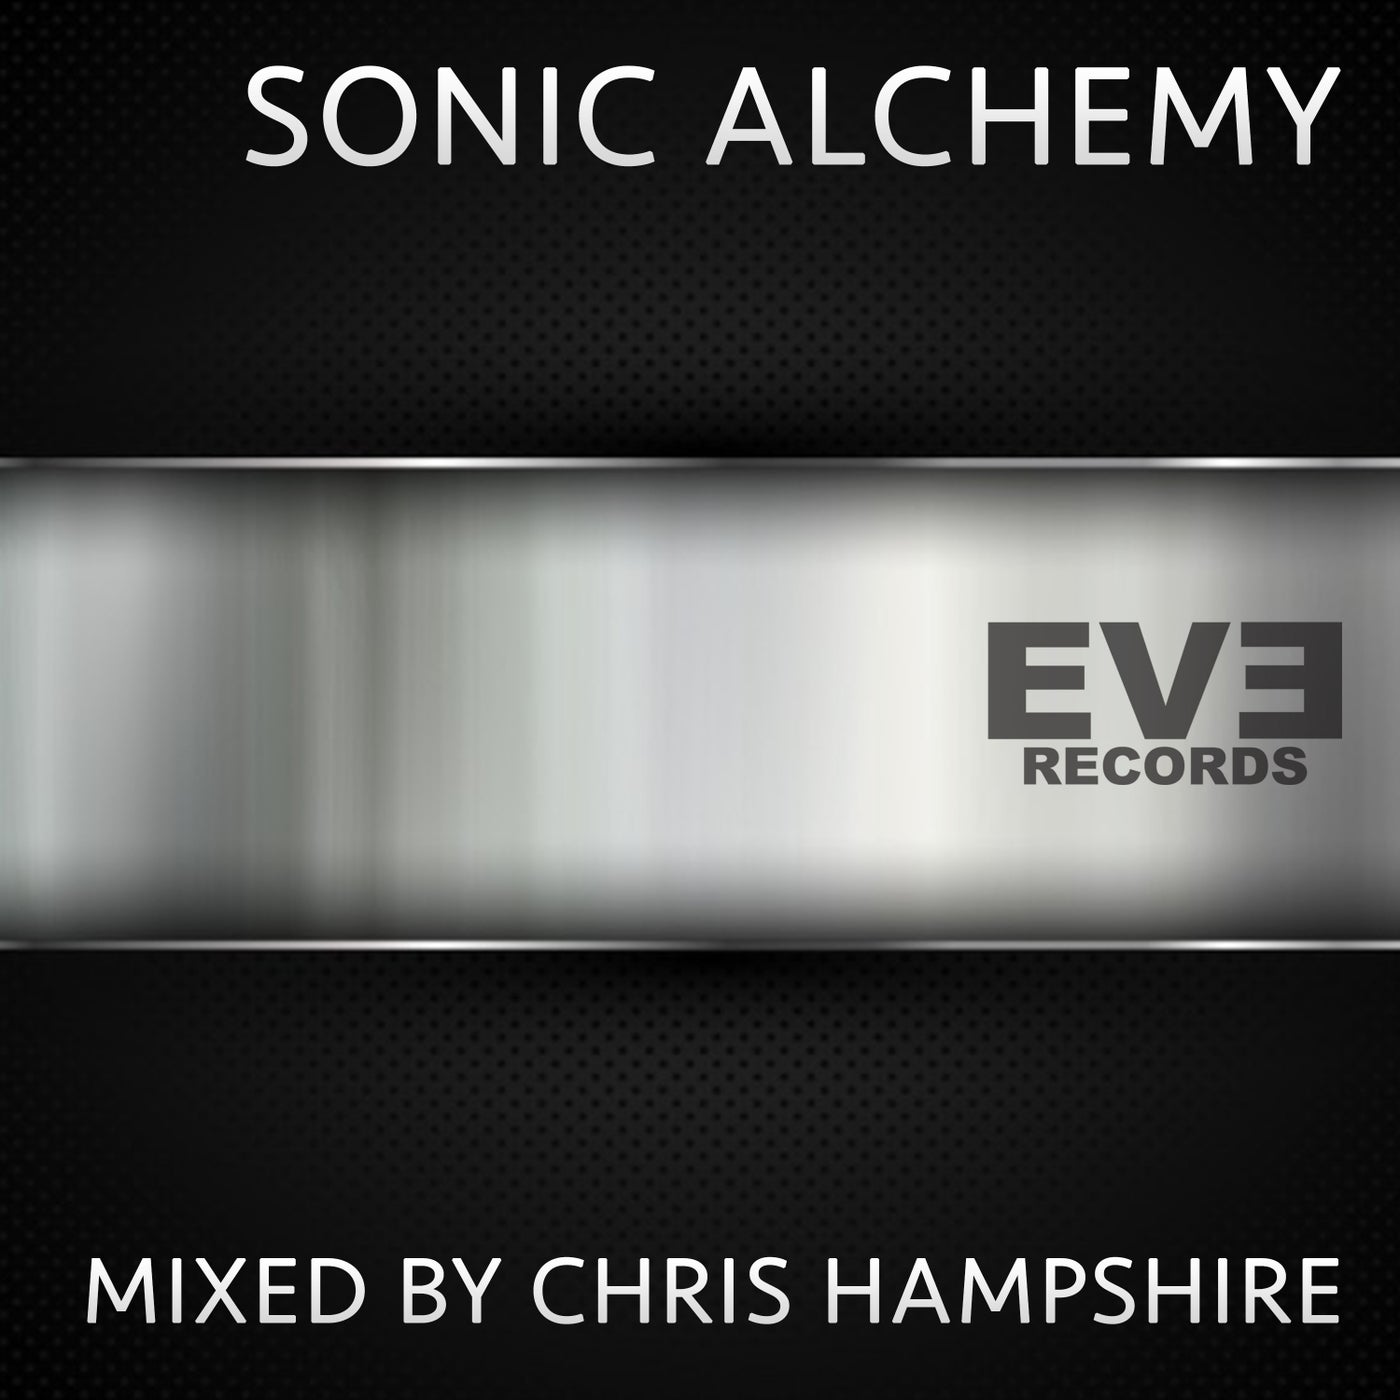 Sonic Alchemy (Mixed by Chris Hampshire)